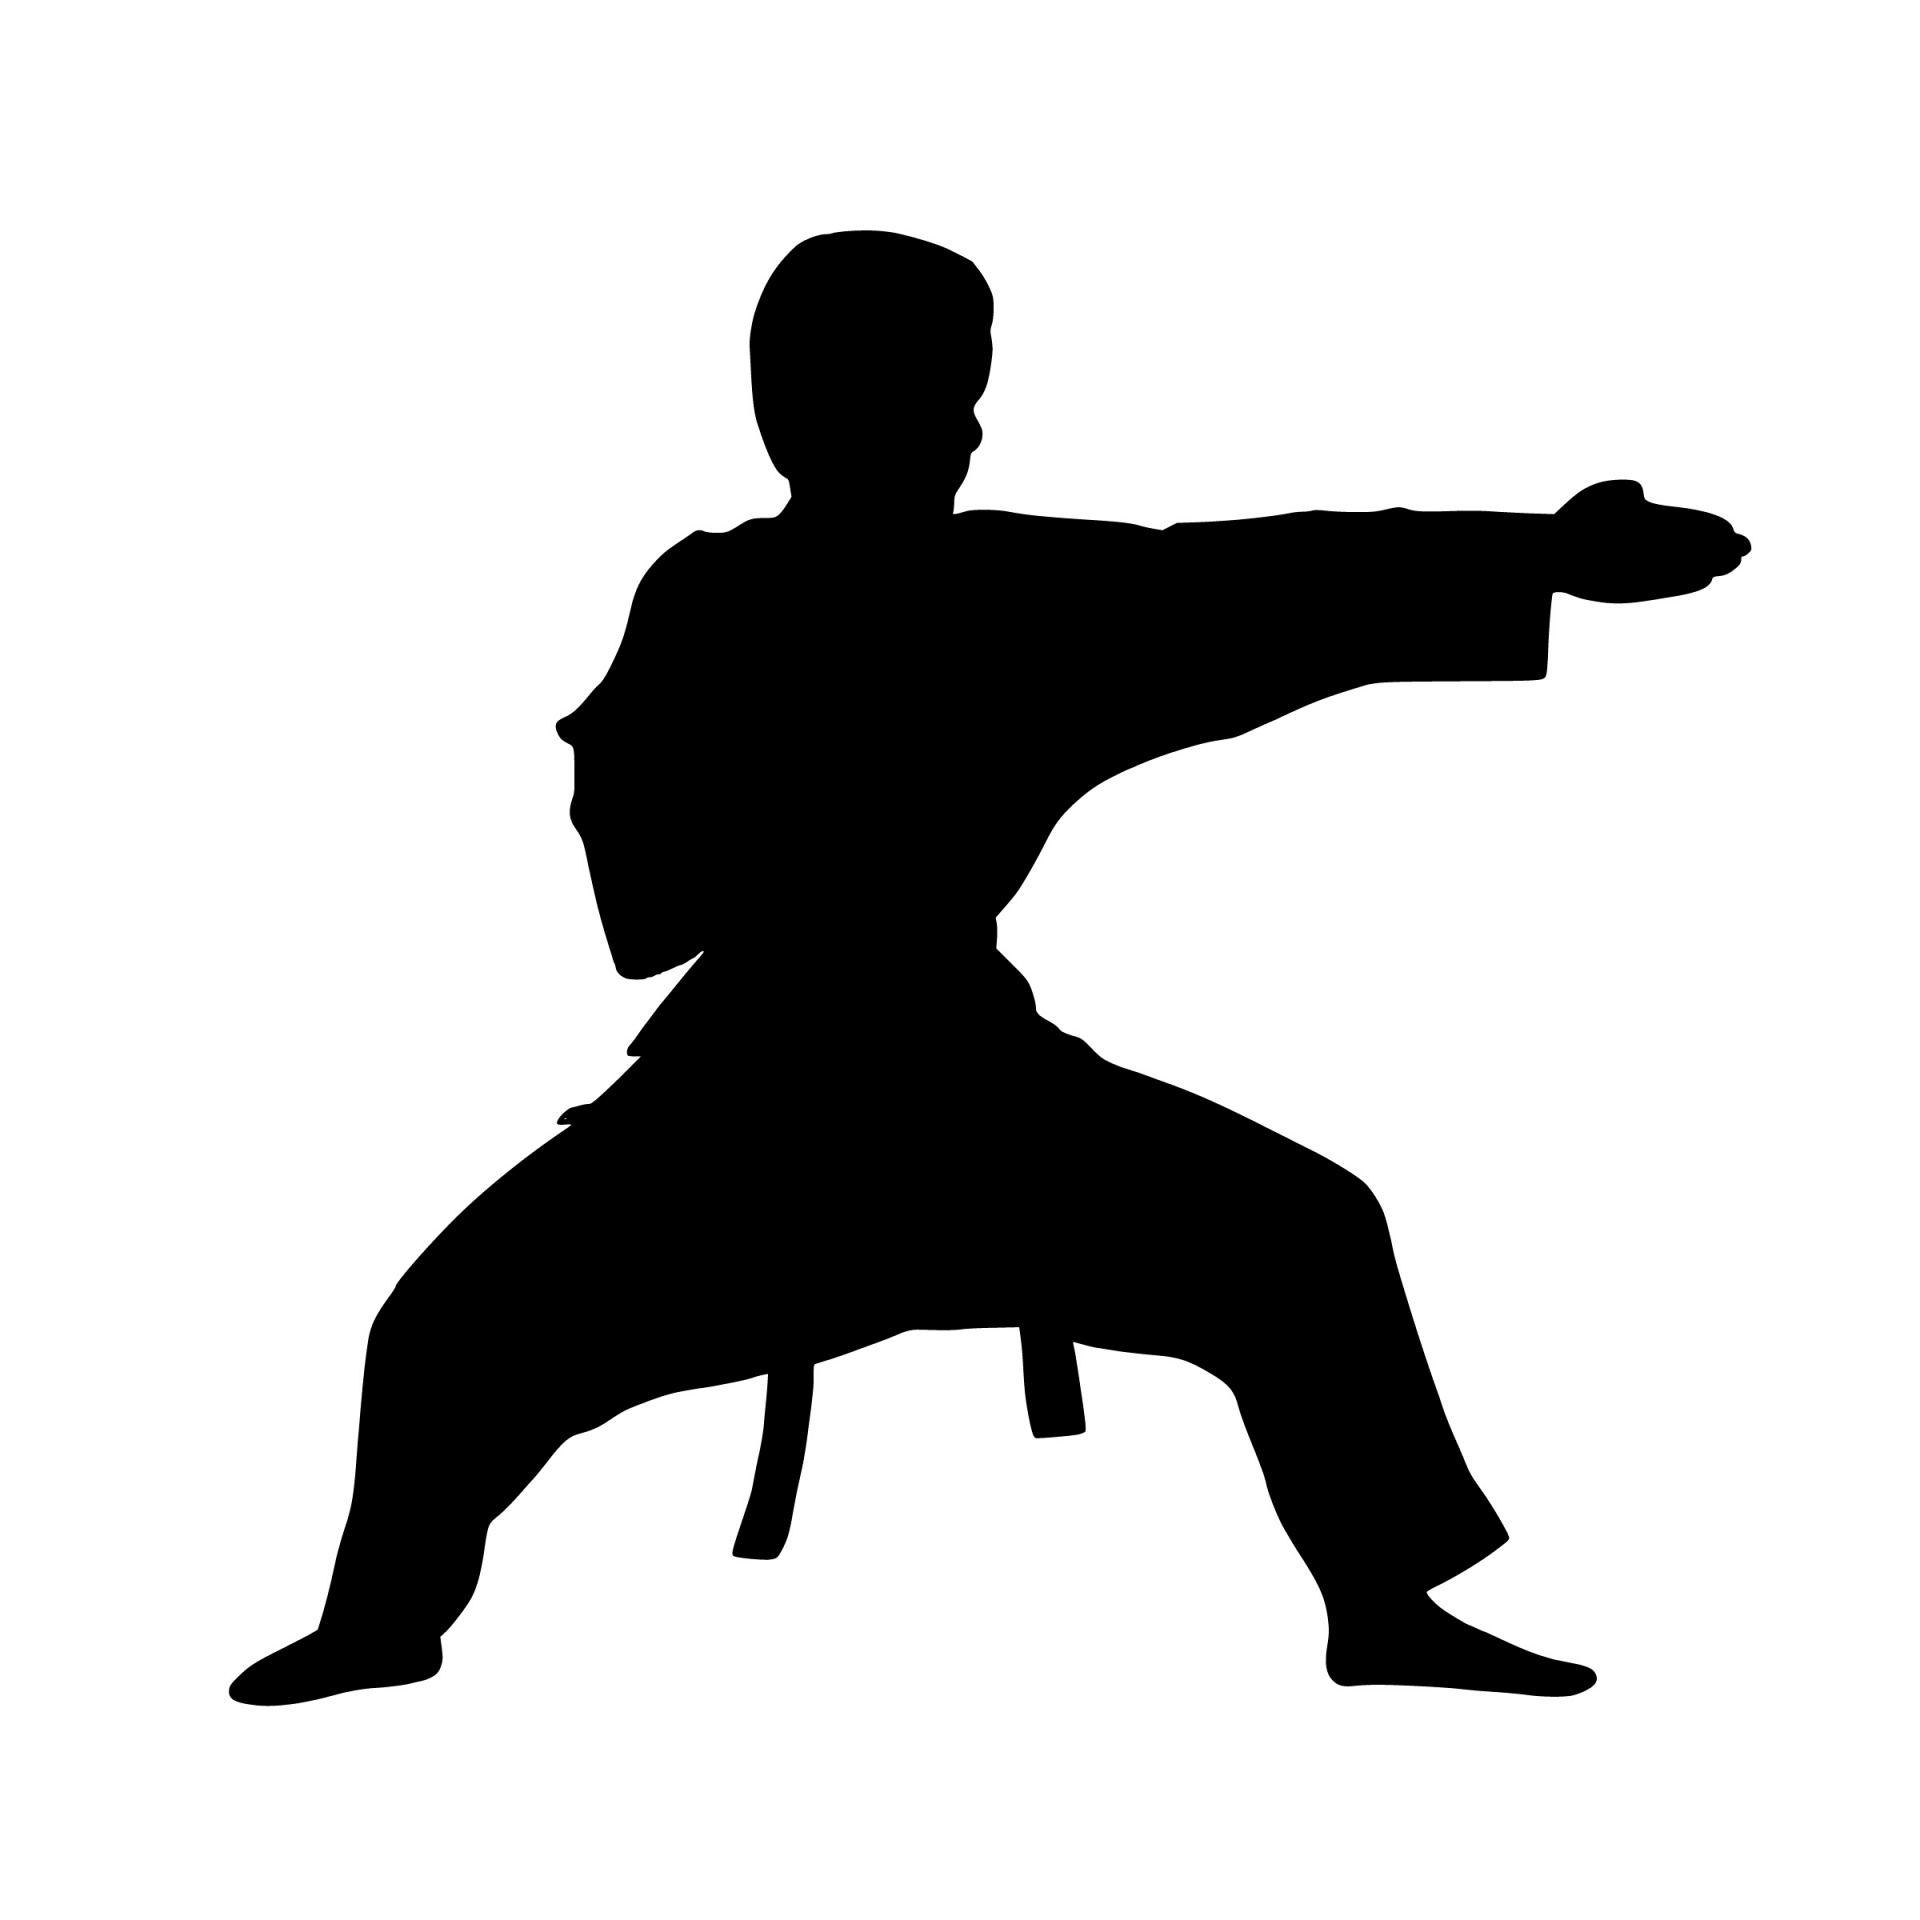 karate-fighter-silhouette